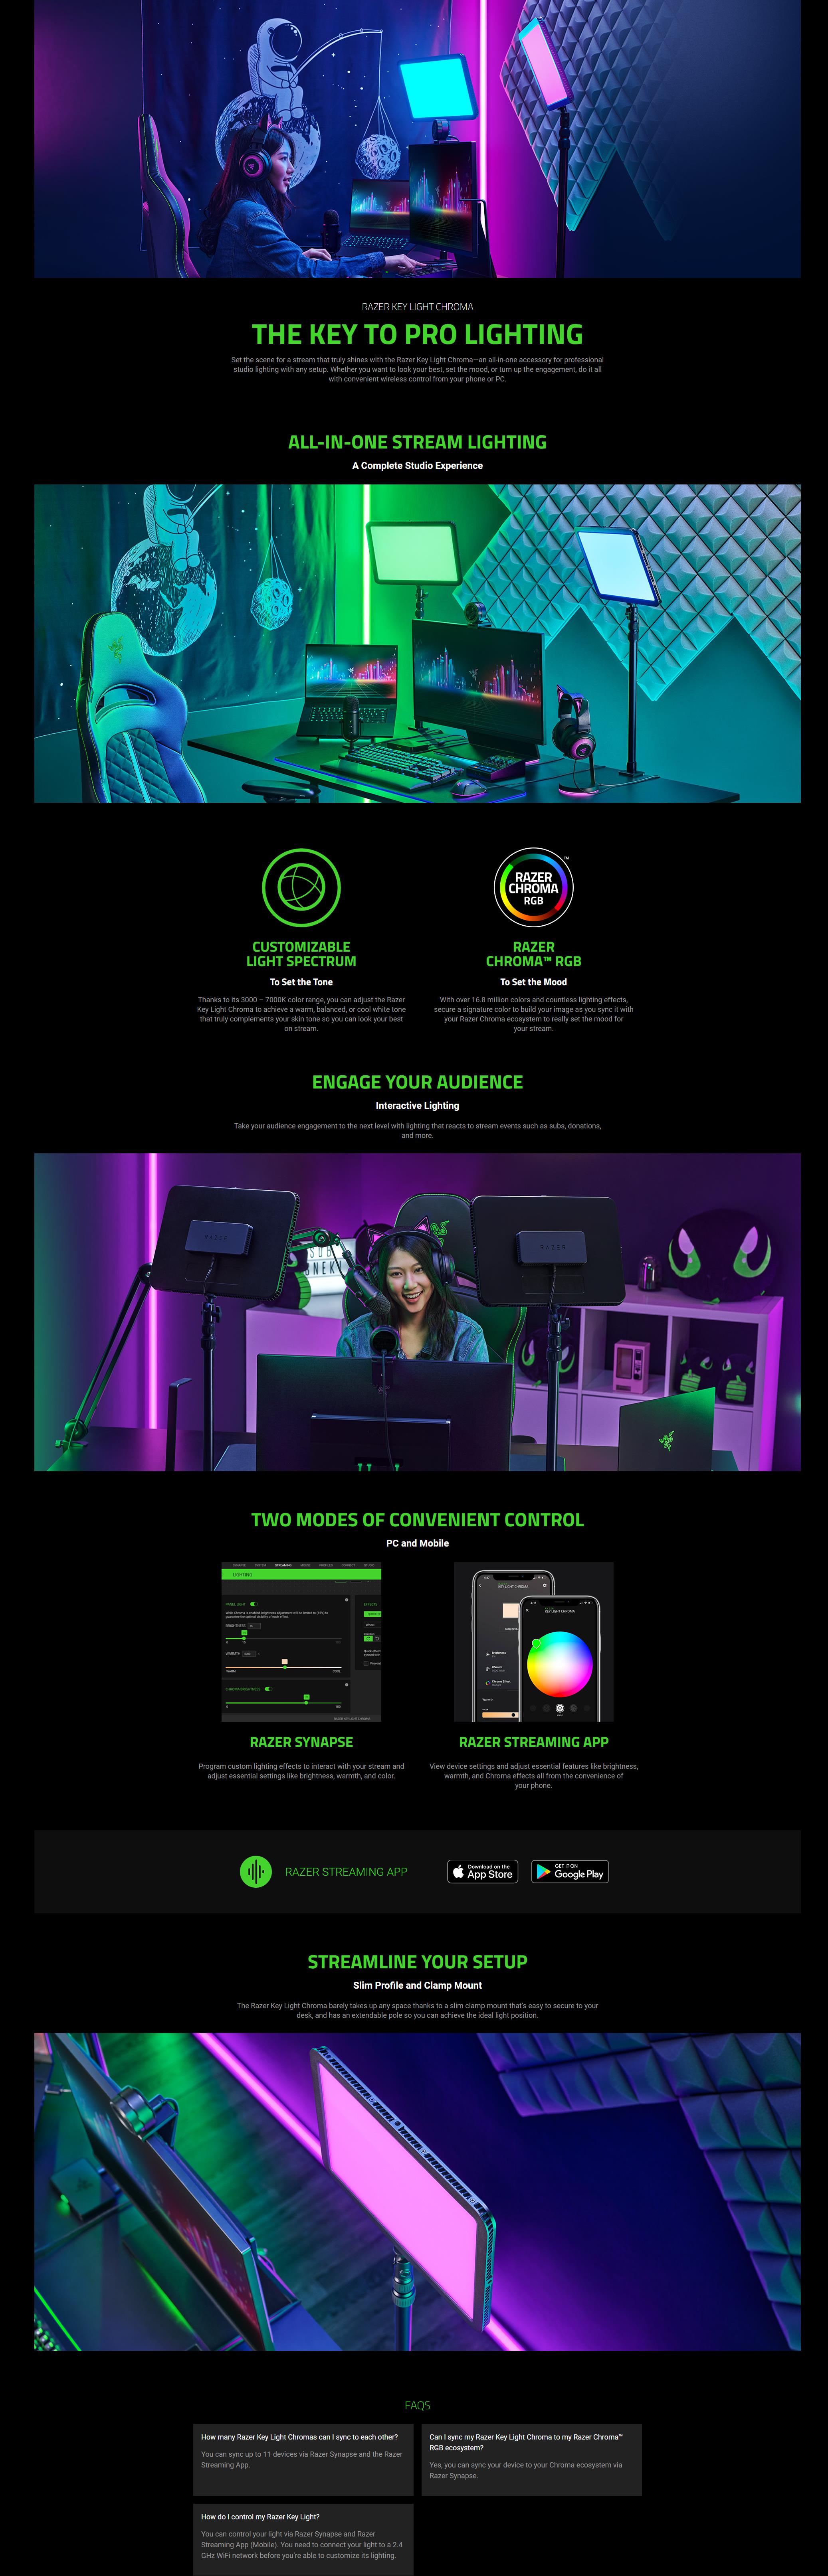 A large marketing image providing additional information about the product Razer Key Light Chroma - All-in-one Lighting Kit for Streaming - Additional alt info not provided